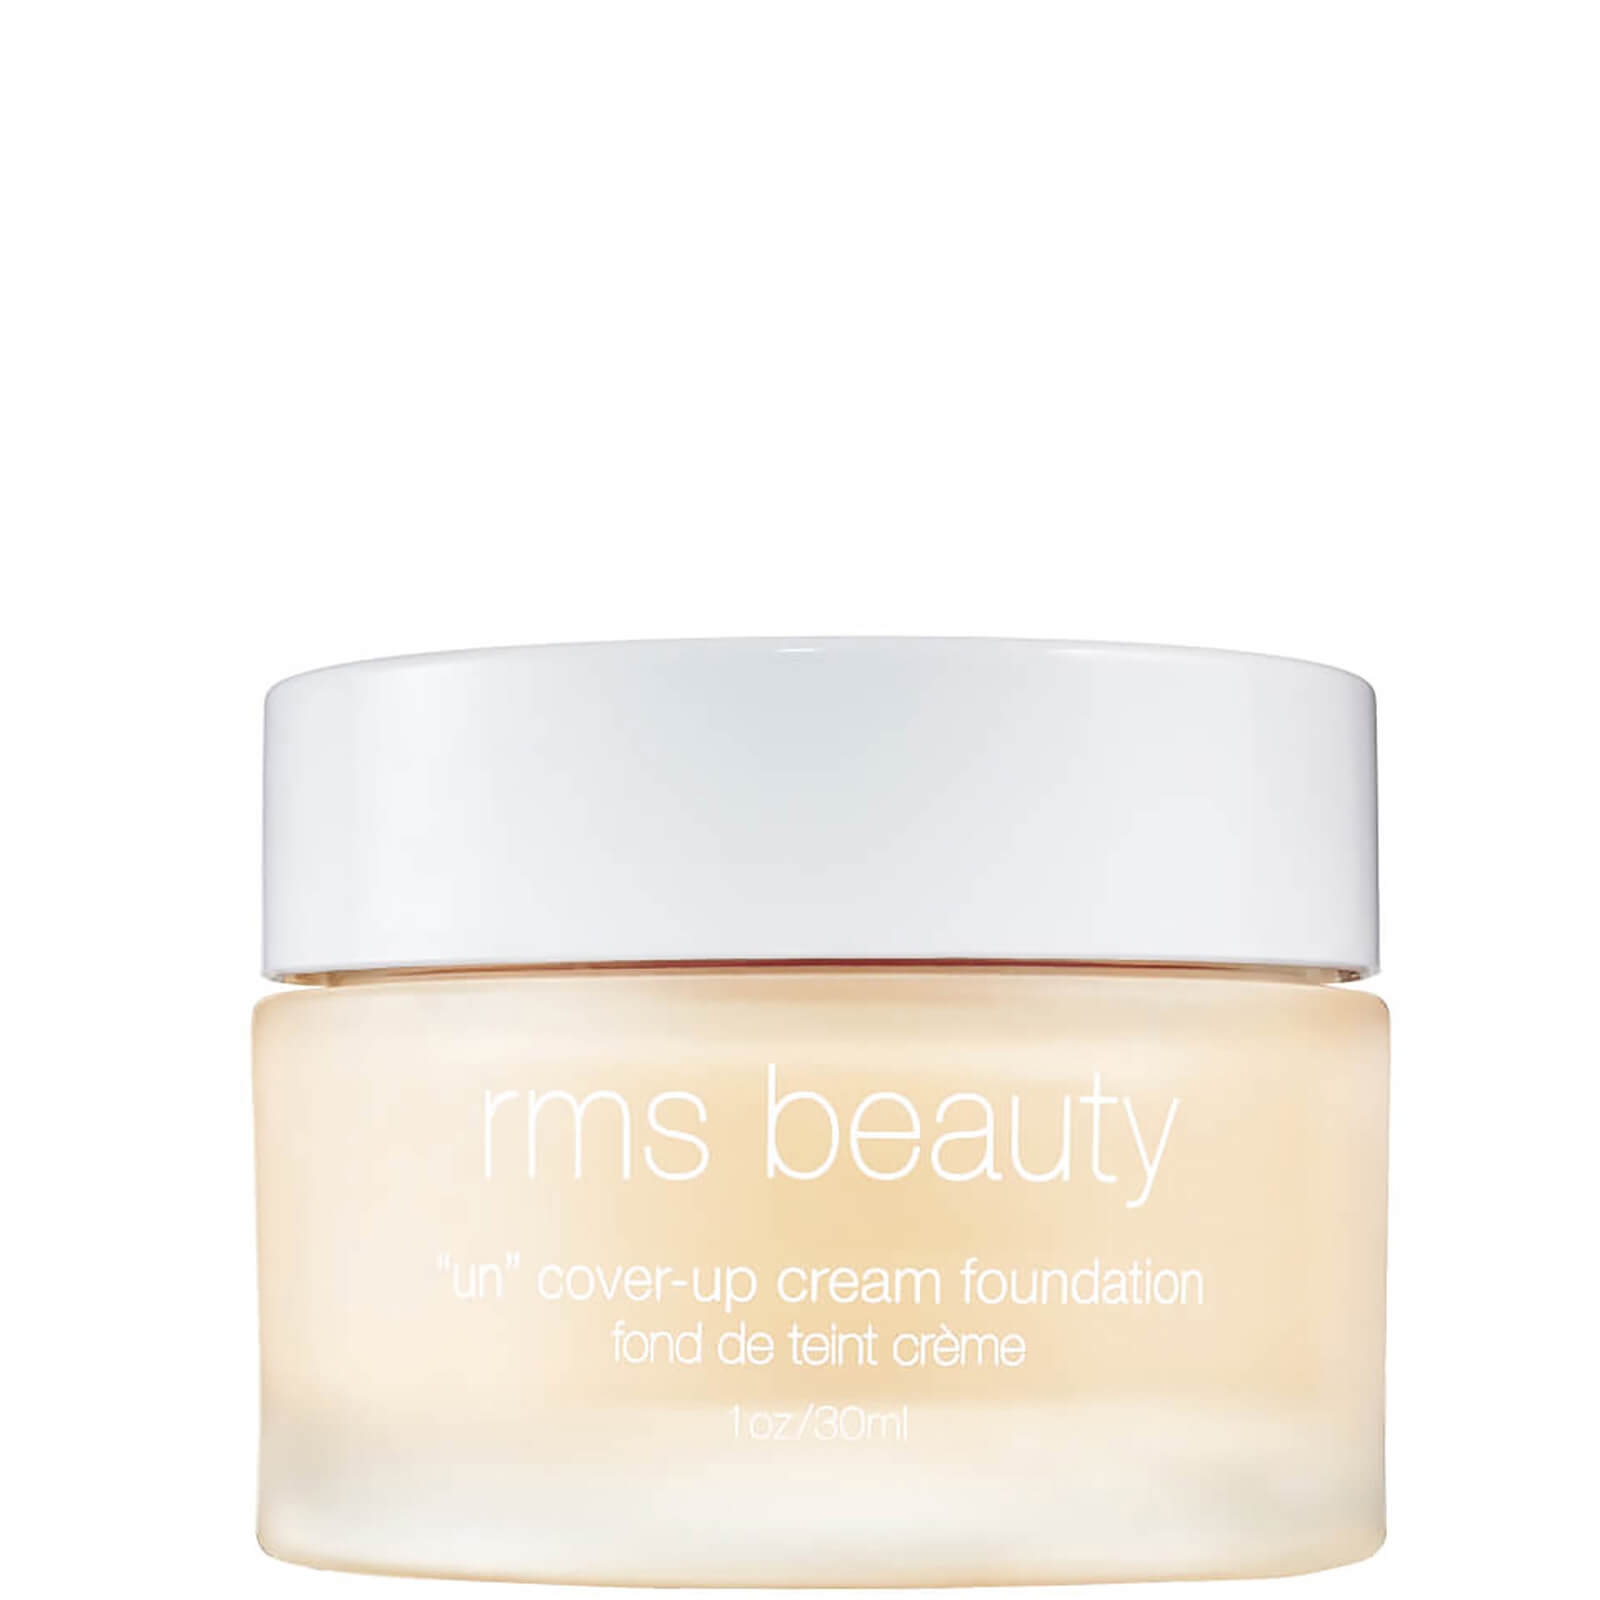 rms beauty uncoverup cream foundation (various shades) - 11 donna